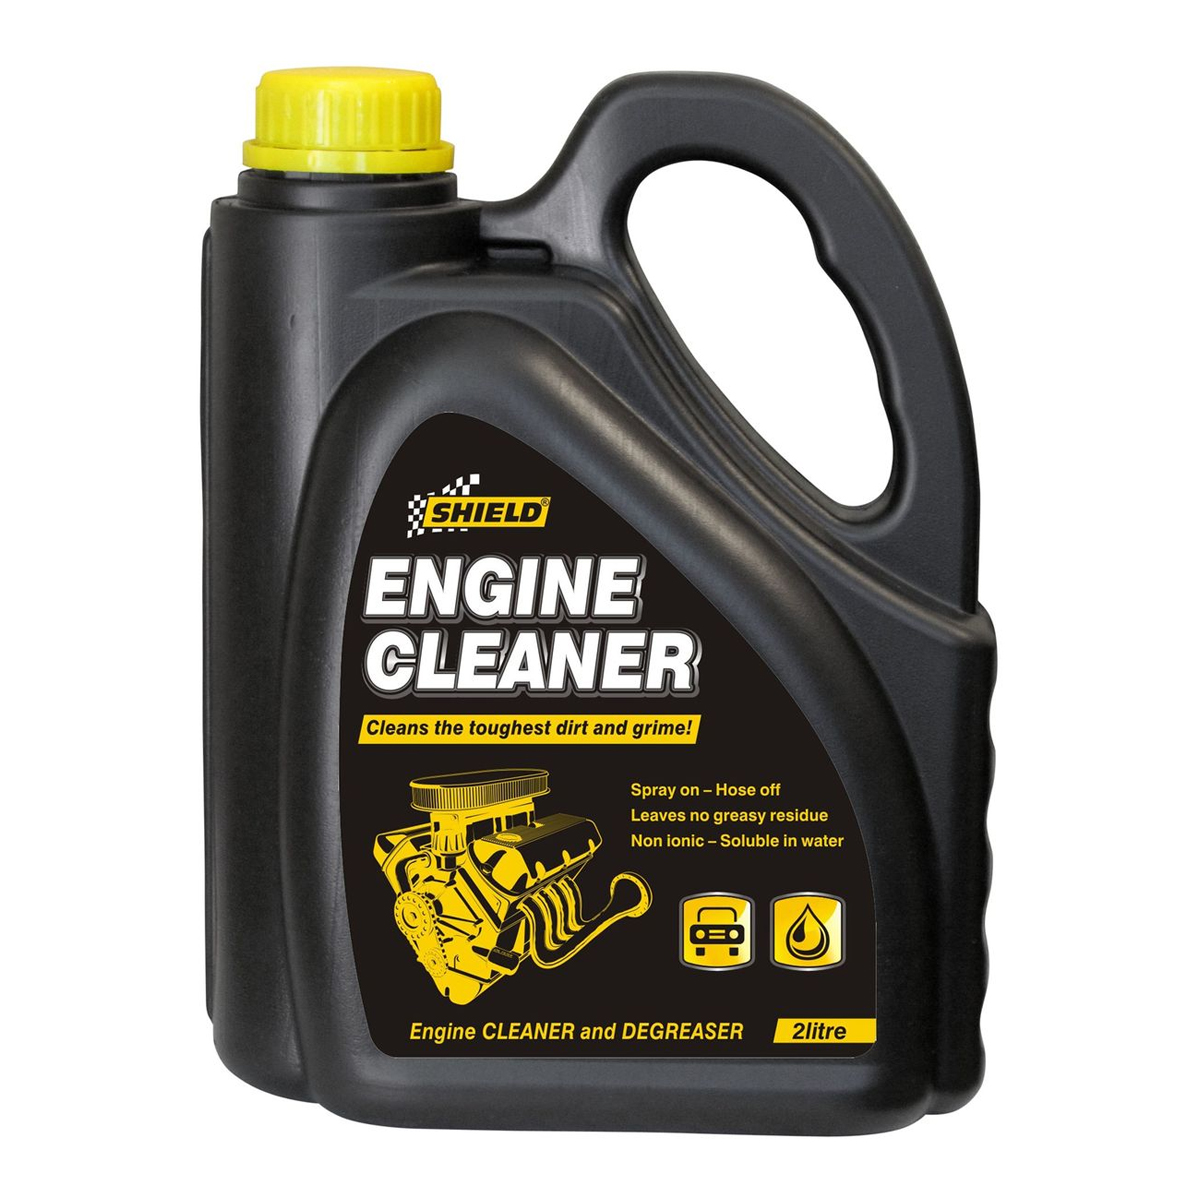 Shield Engine Cleaner Water Based Liquid 2L